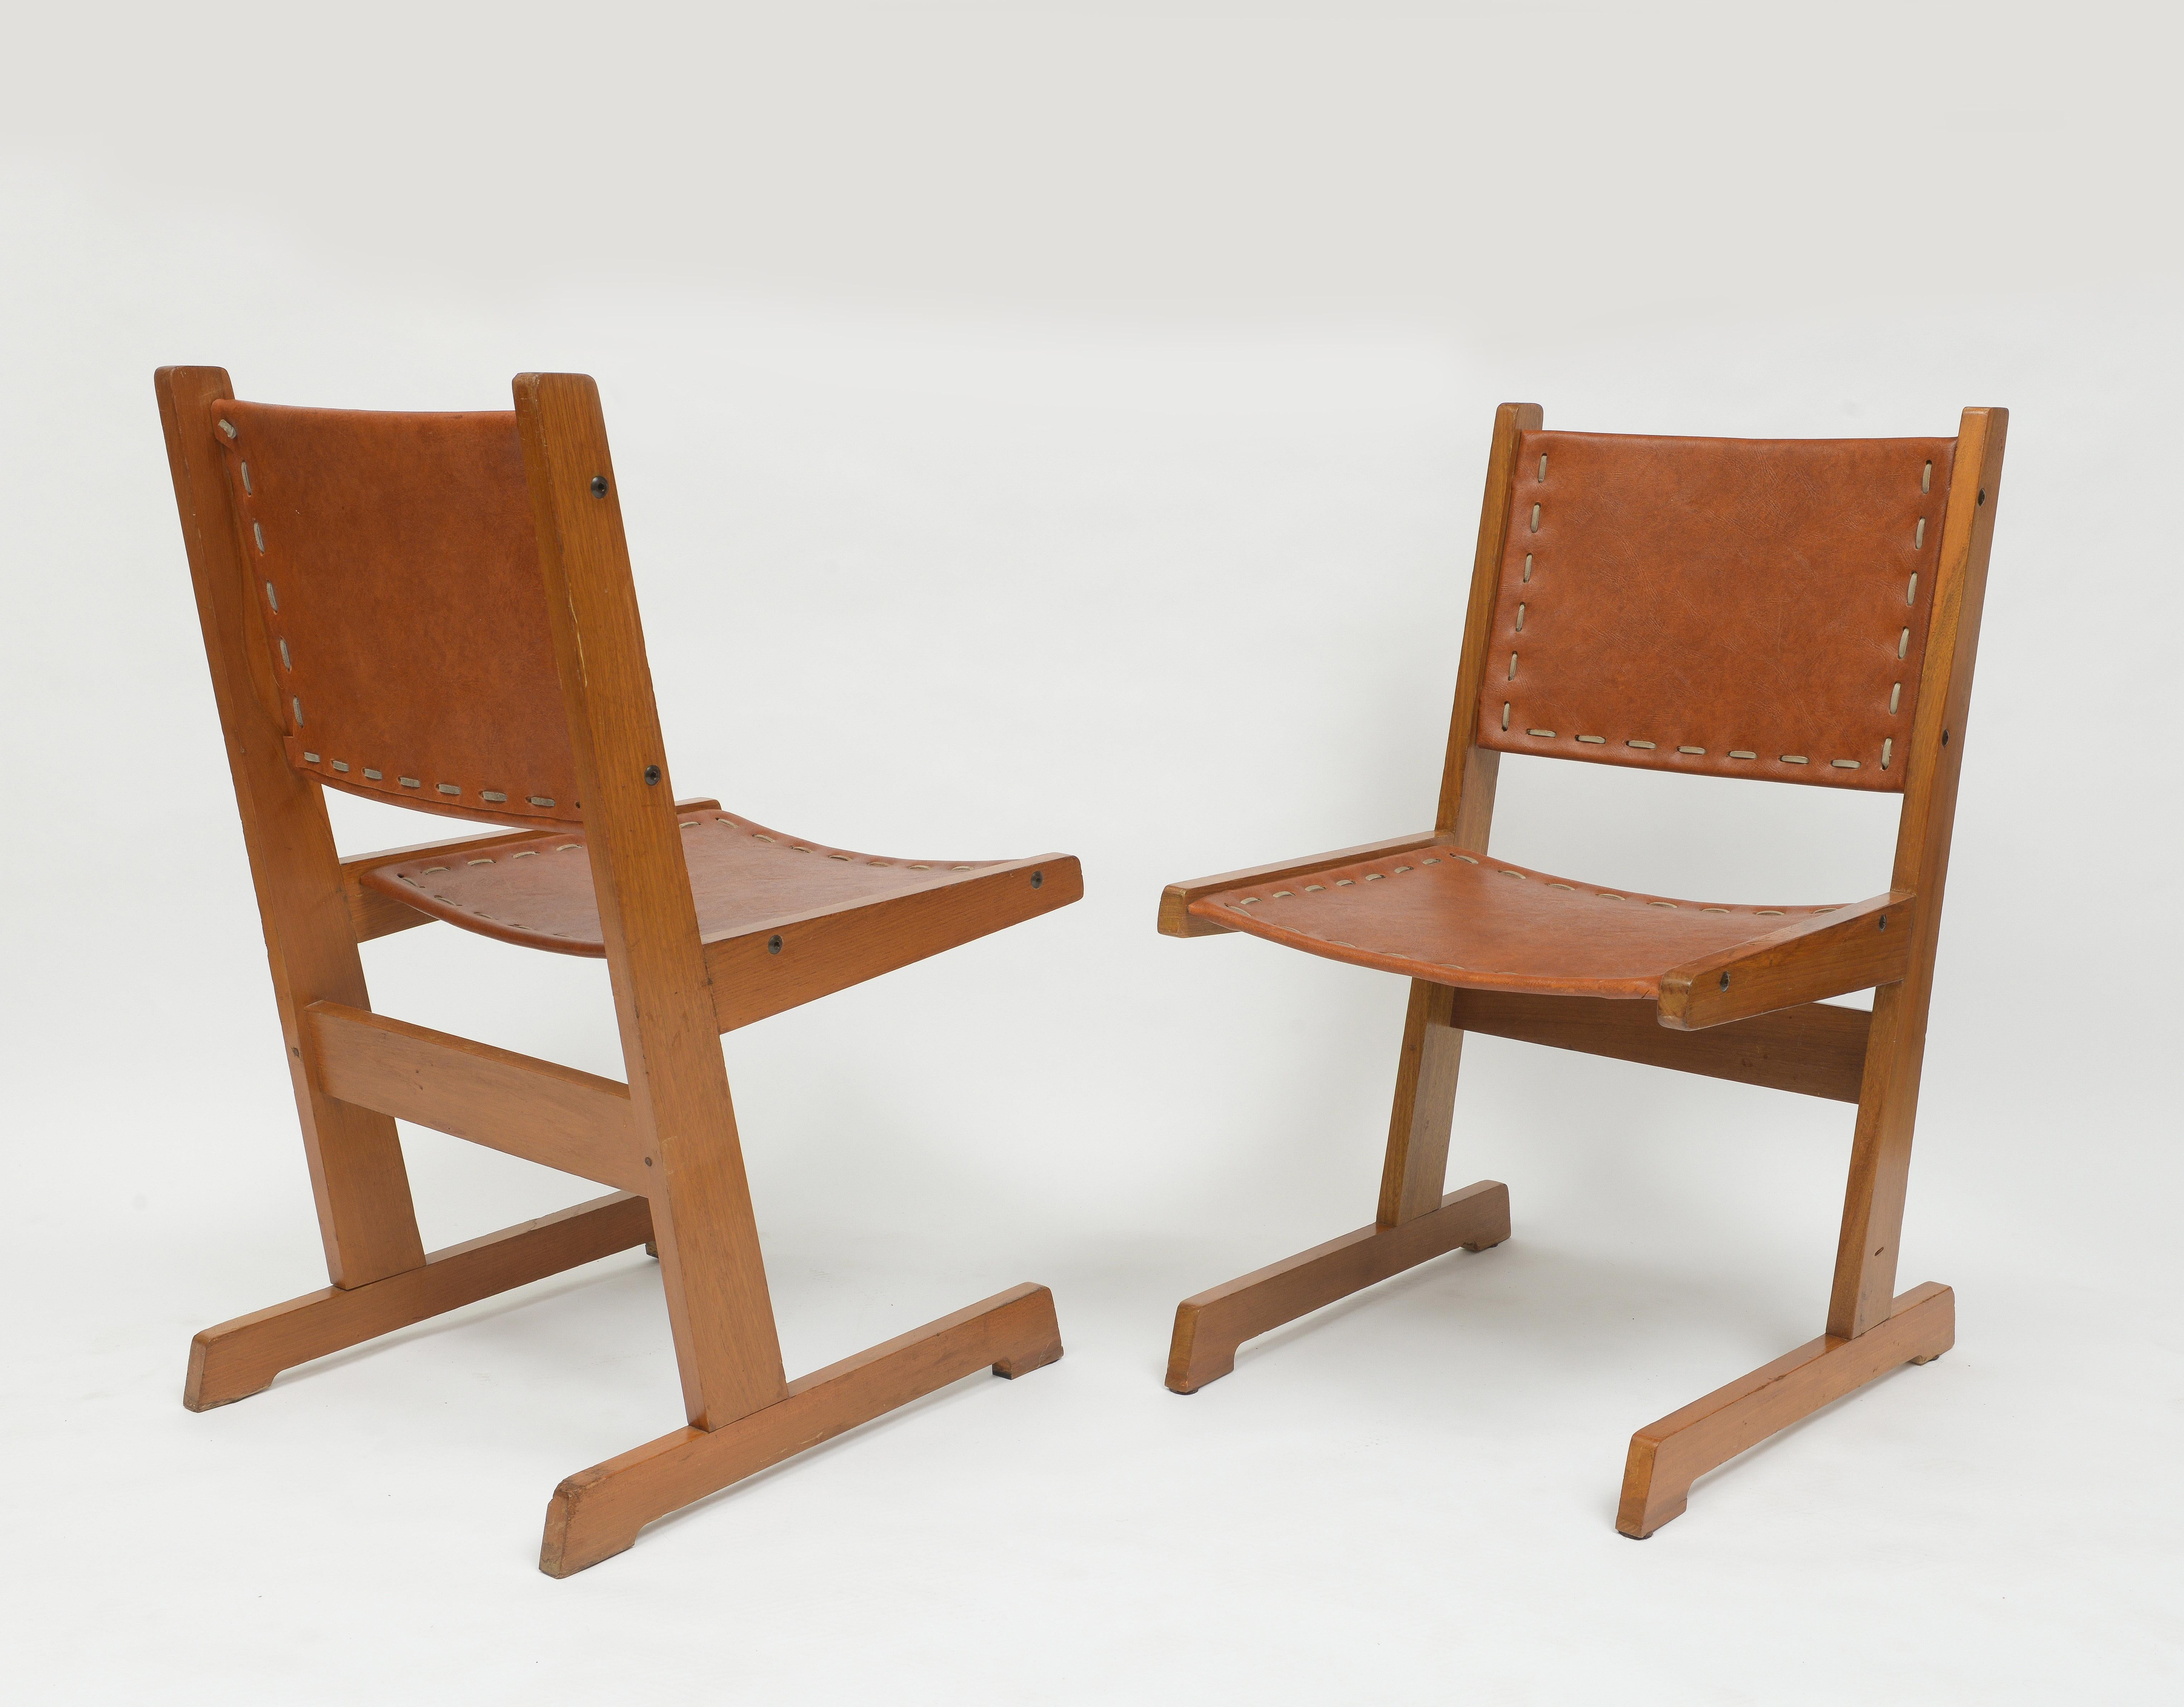 Beautiful pair of hand-stitched leather and wood cantilevered chairs. 